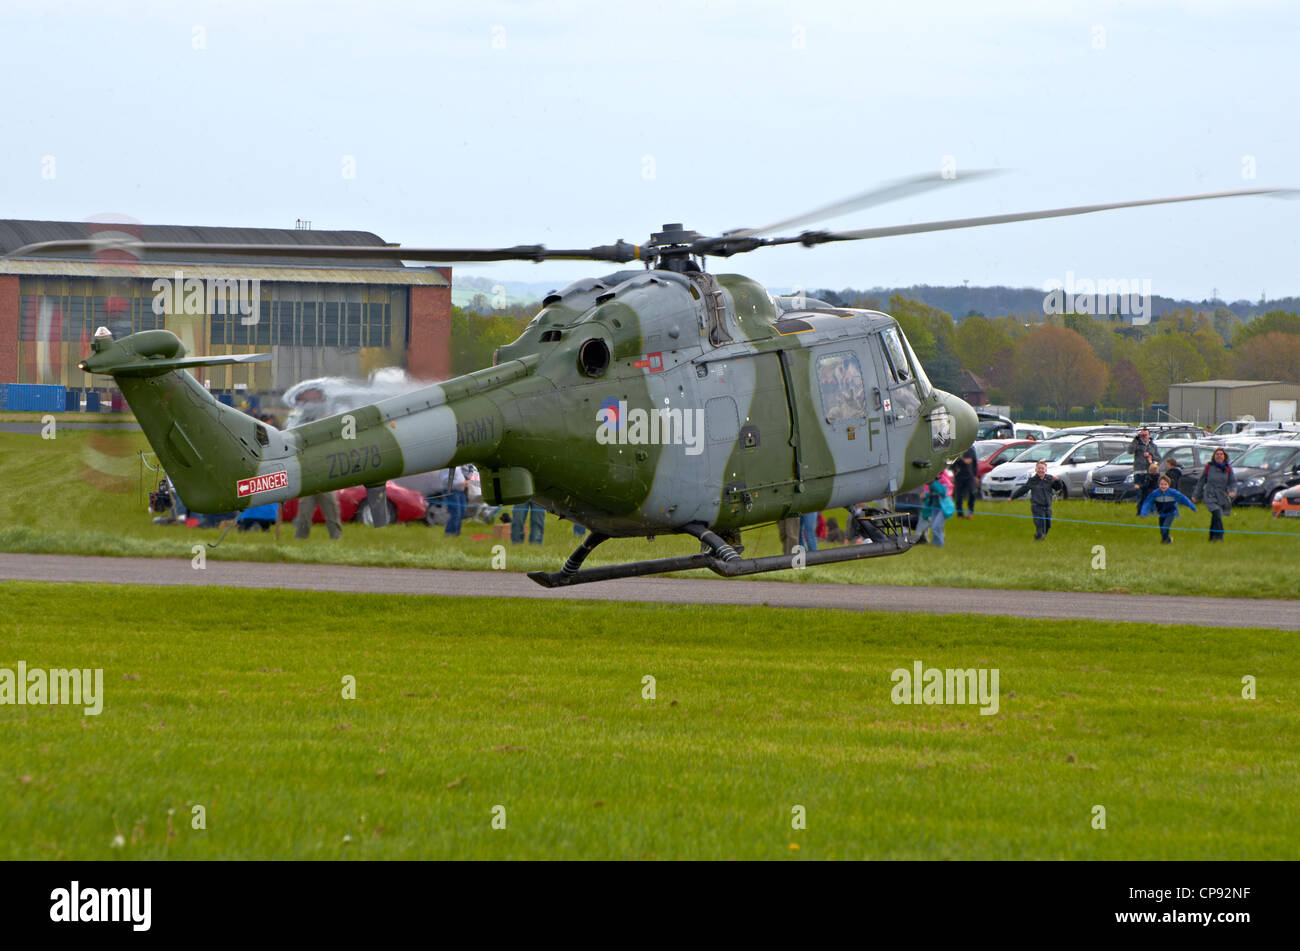 RAF Westland Lynx helicopter hovering as it comes in to land at Abingdon Airshow 2012. Stock Photo